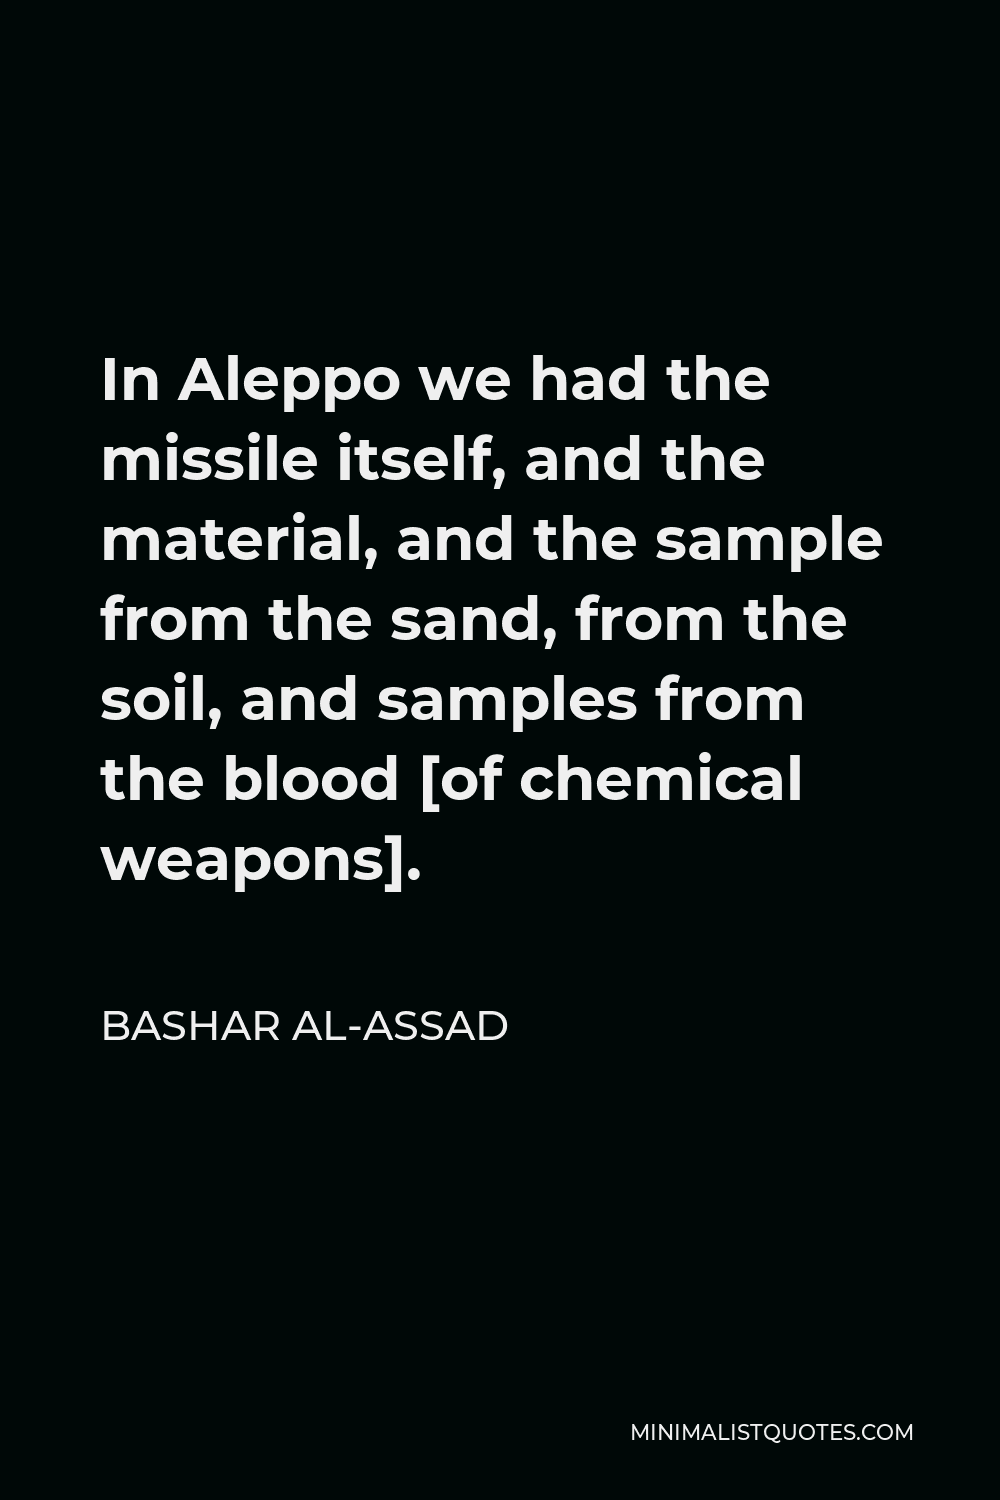 Bashar al-Assad Quote - In Aleppo we had the missile itself, and the material, and the sample from the sand, from the soil, and samples from the blood [of chemical weapons].